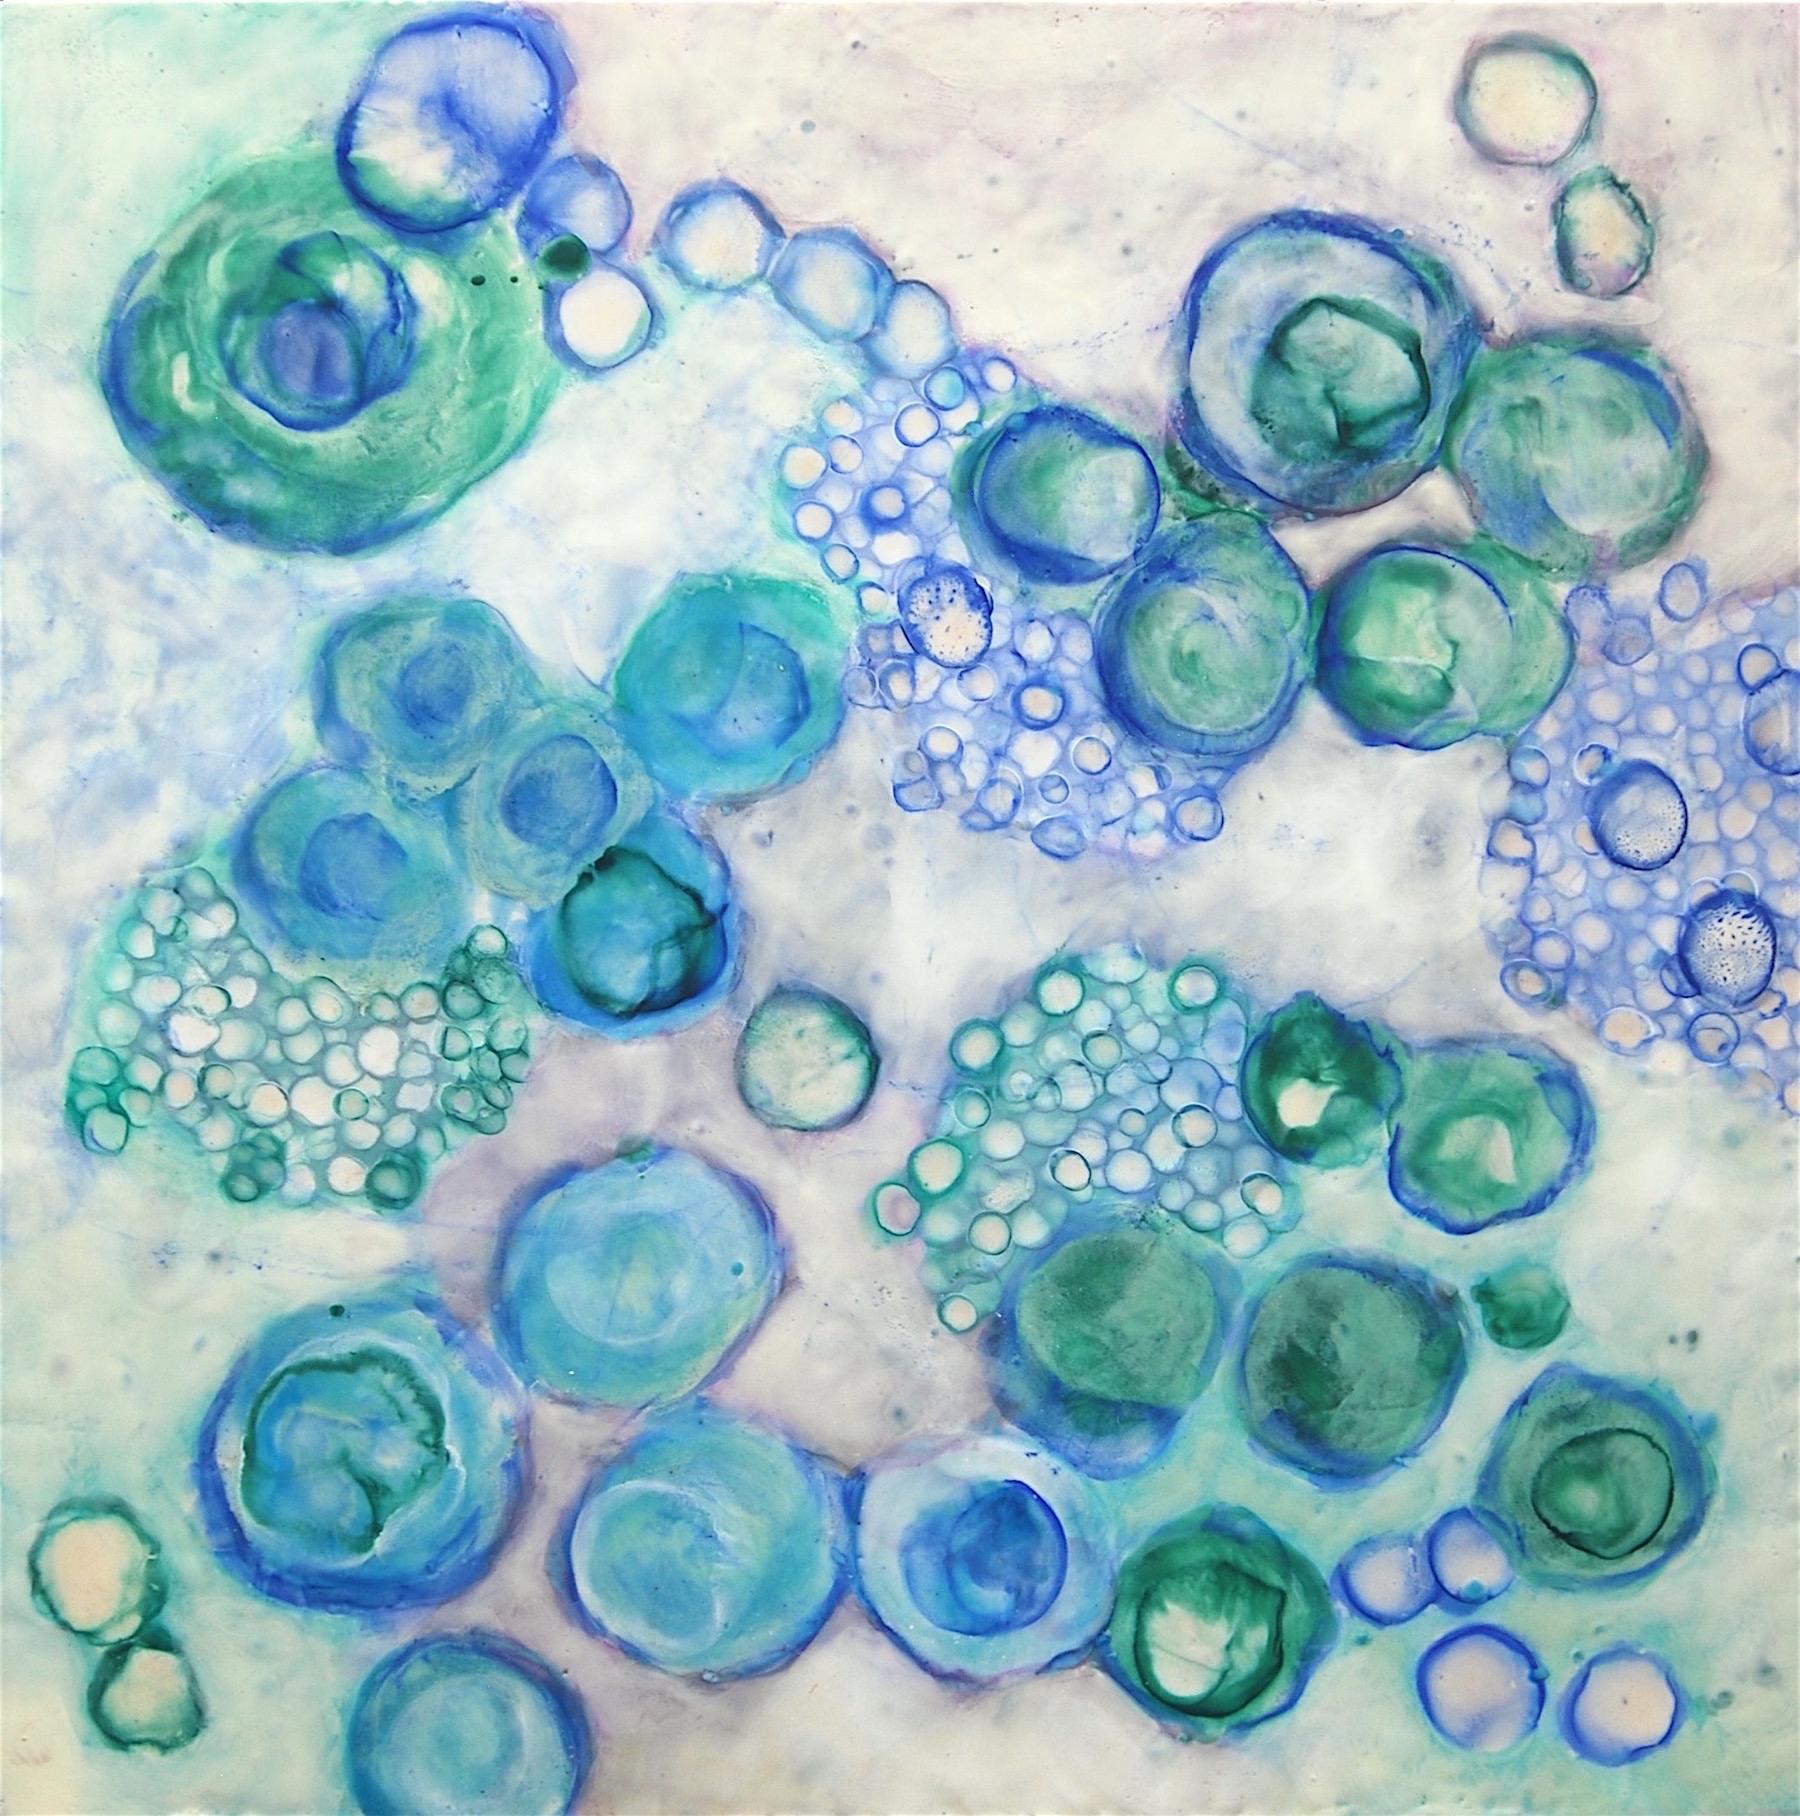 Bio Flow 20 - Painting by Kay Hartung